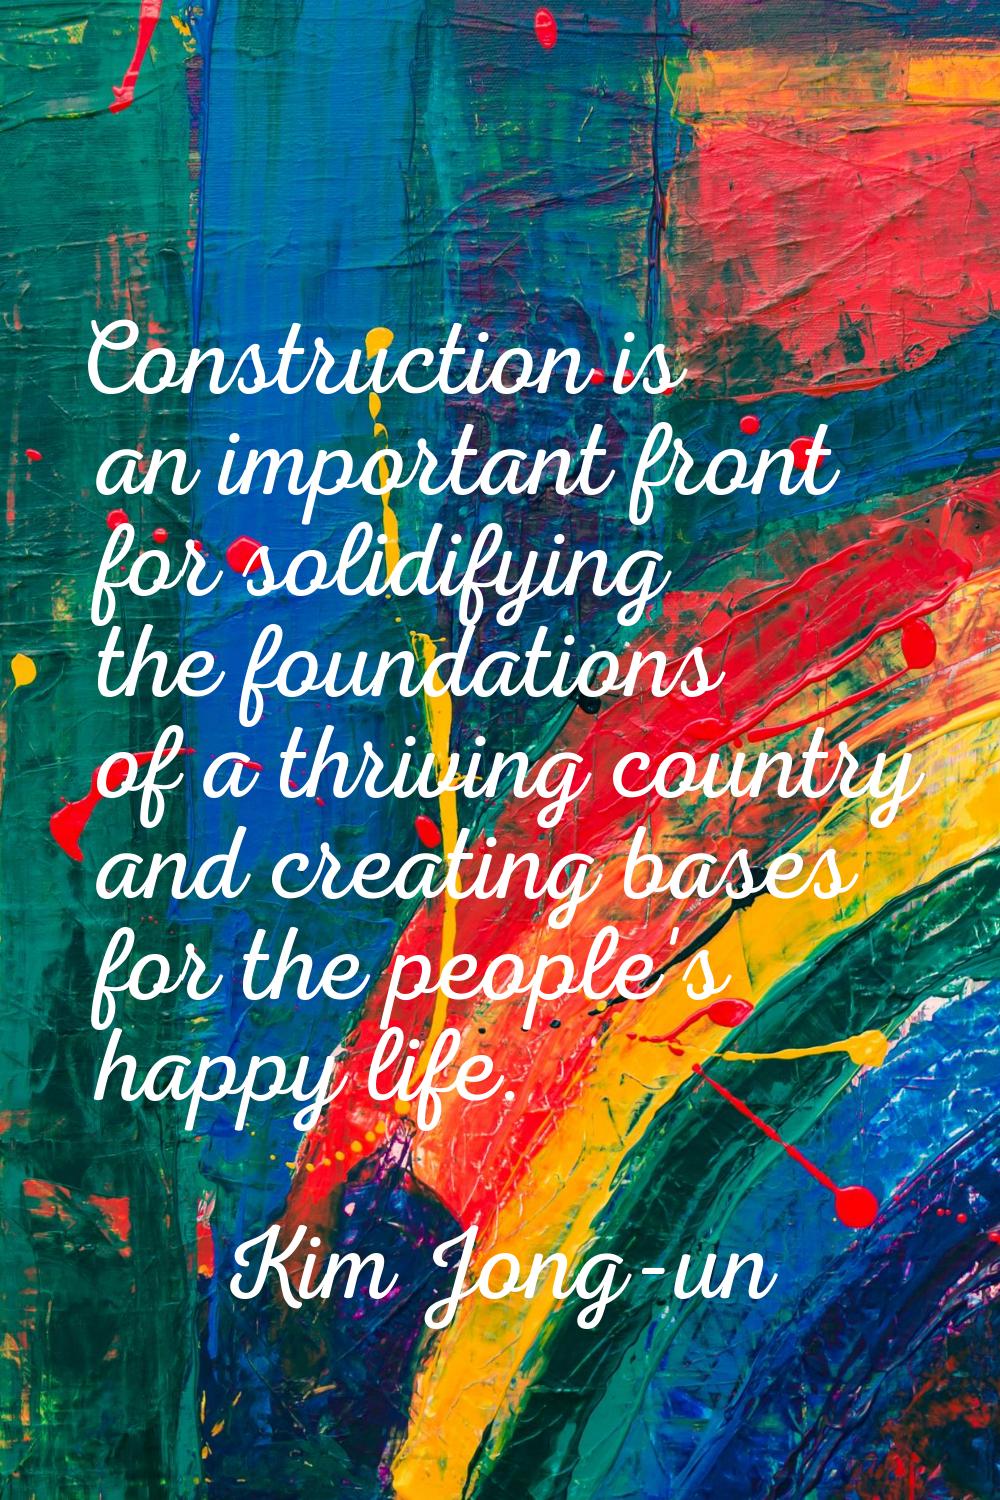 Construction is an important front for solidifying the foundations of a thriving country and creati